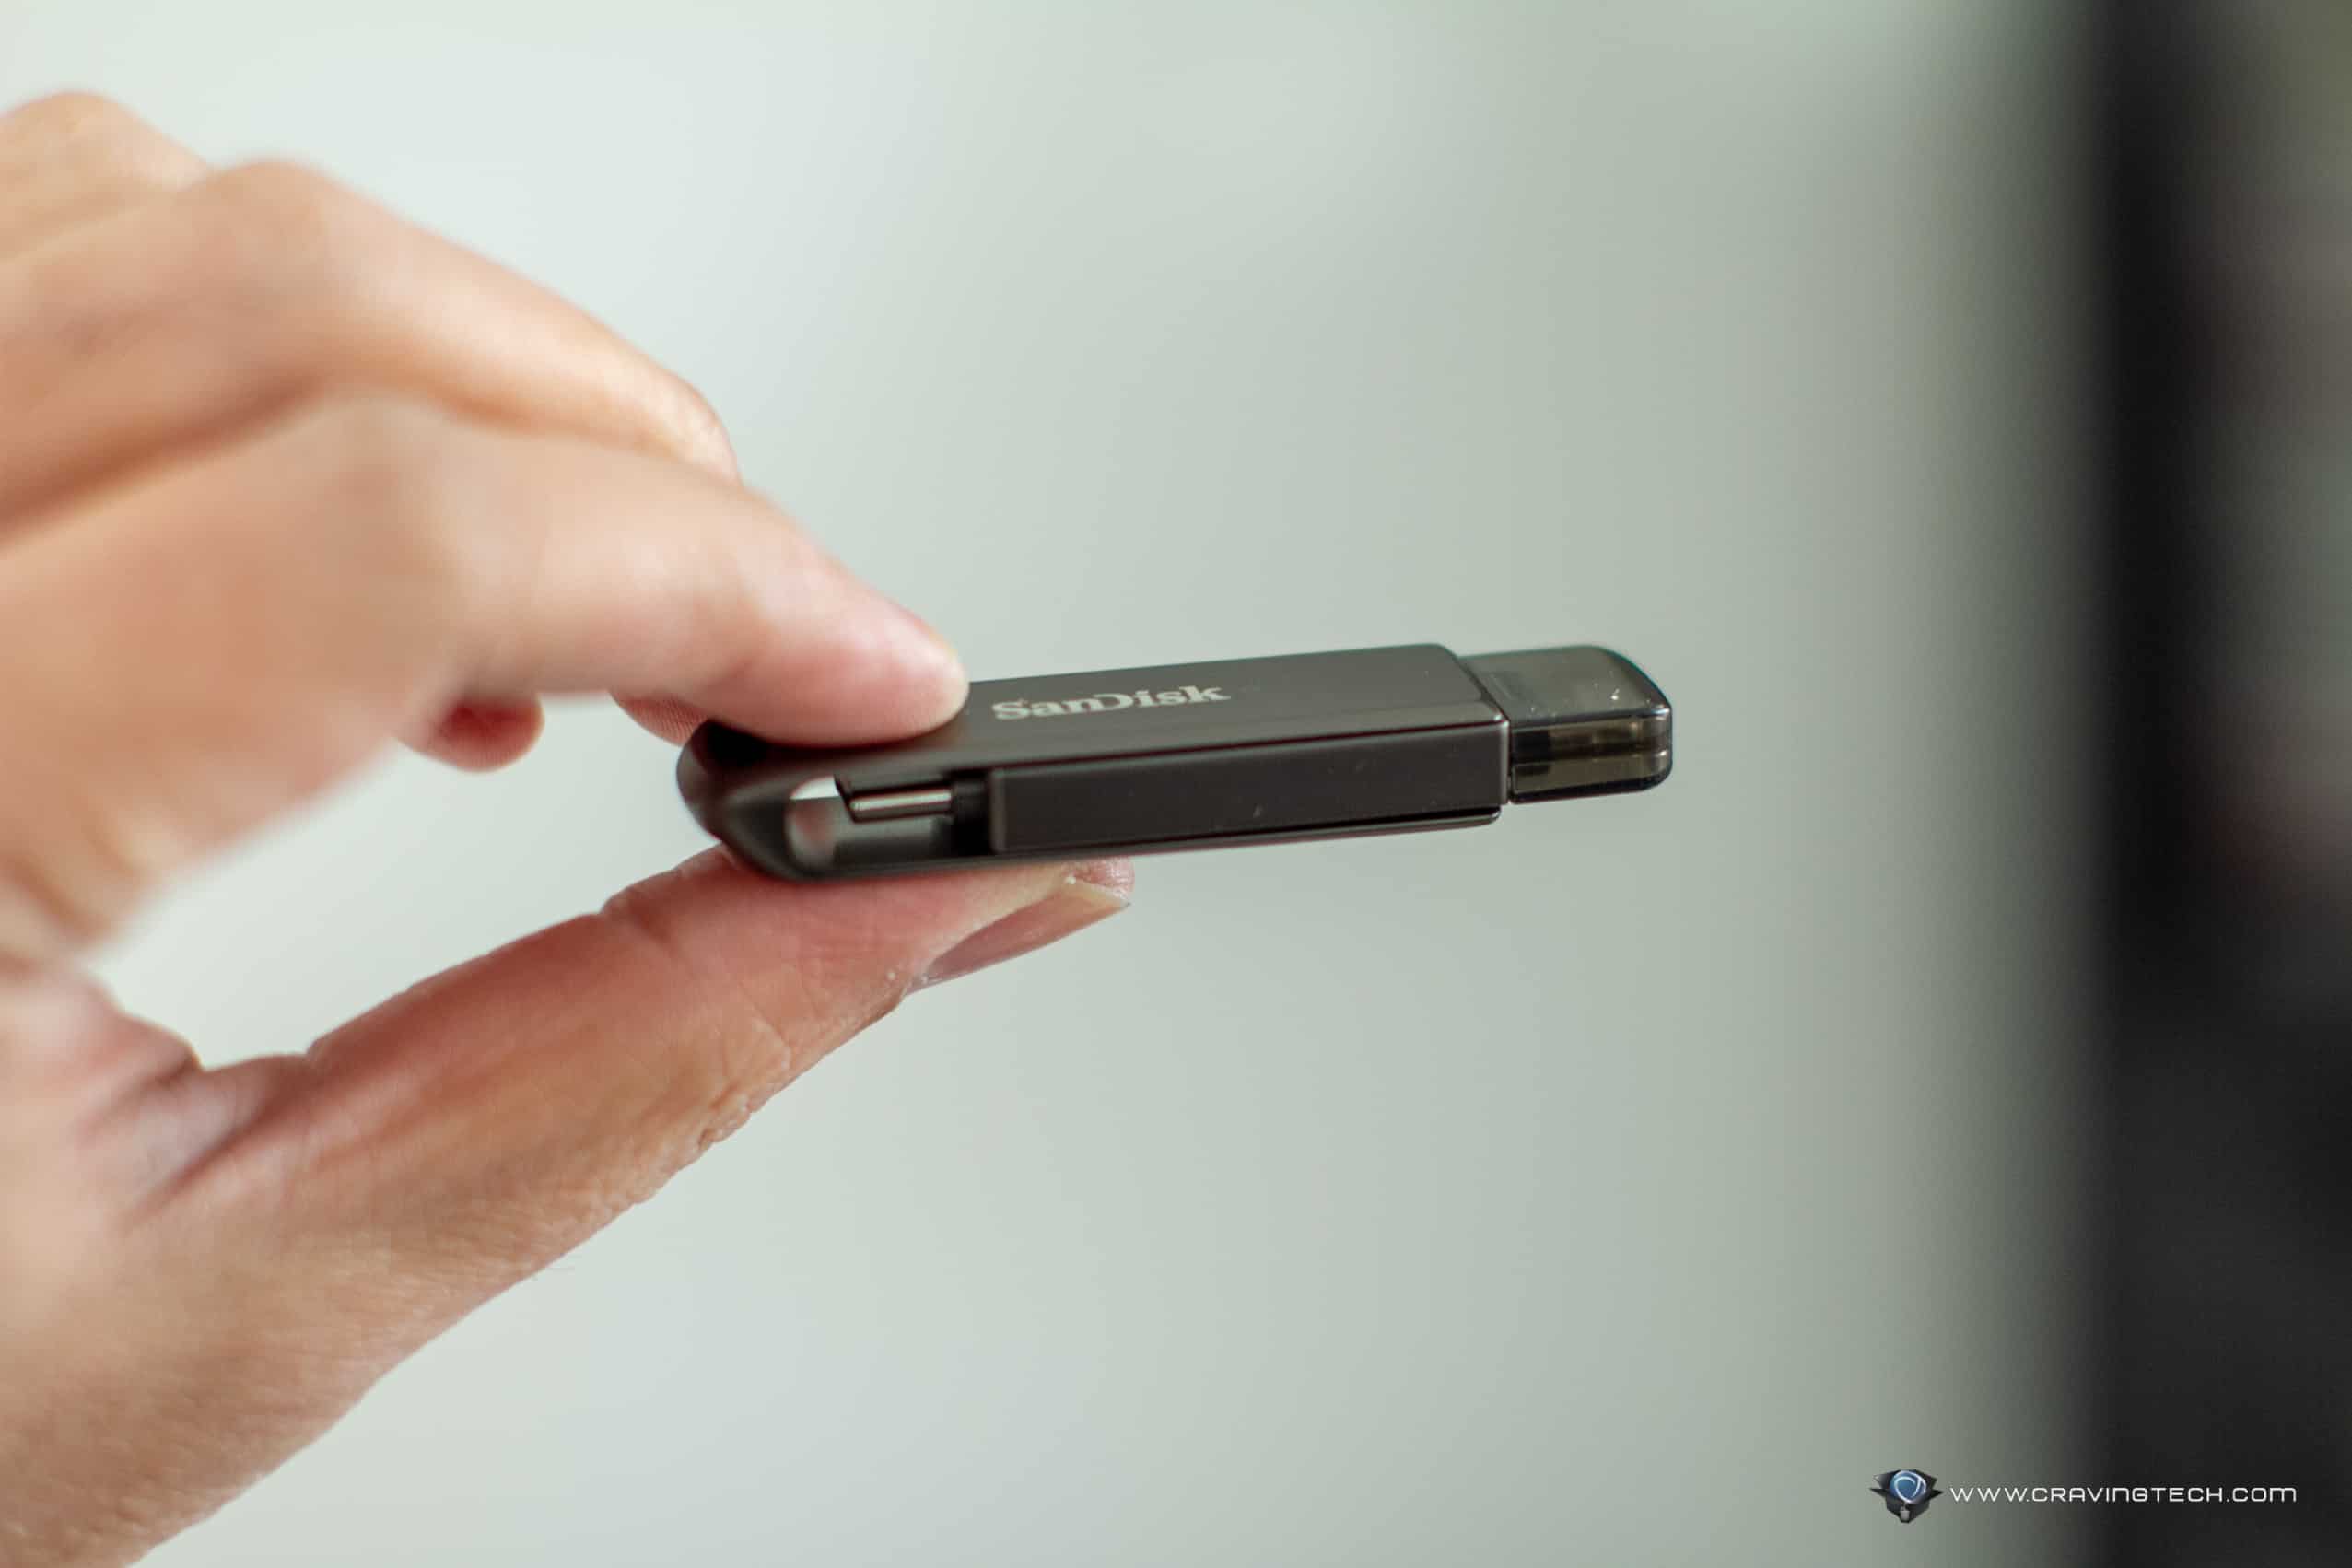 Backup your iPhone photos and videos with this slim USB drive – SanDisk iXpand Flash Drive Luxe Review